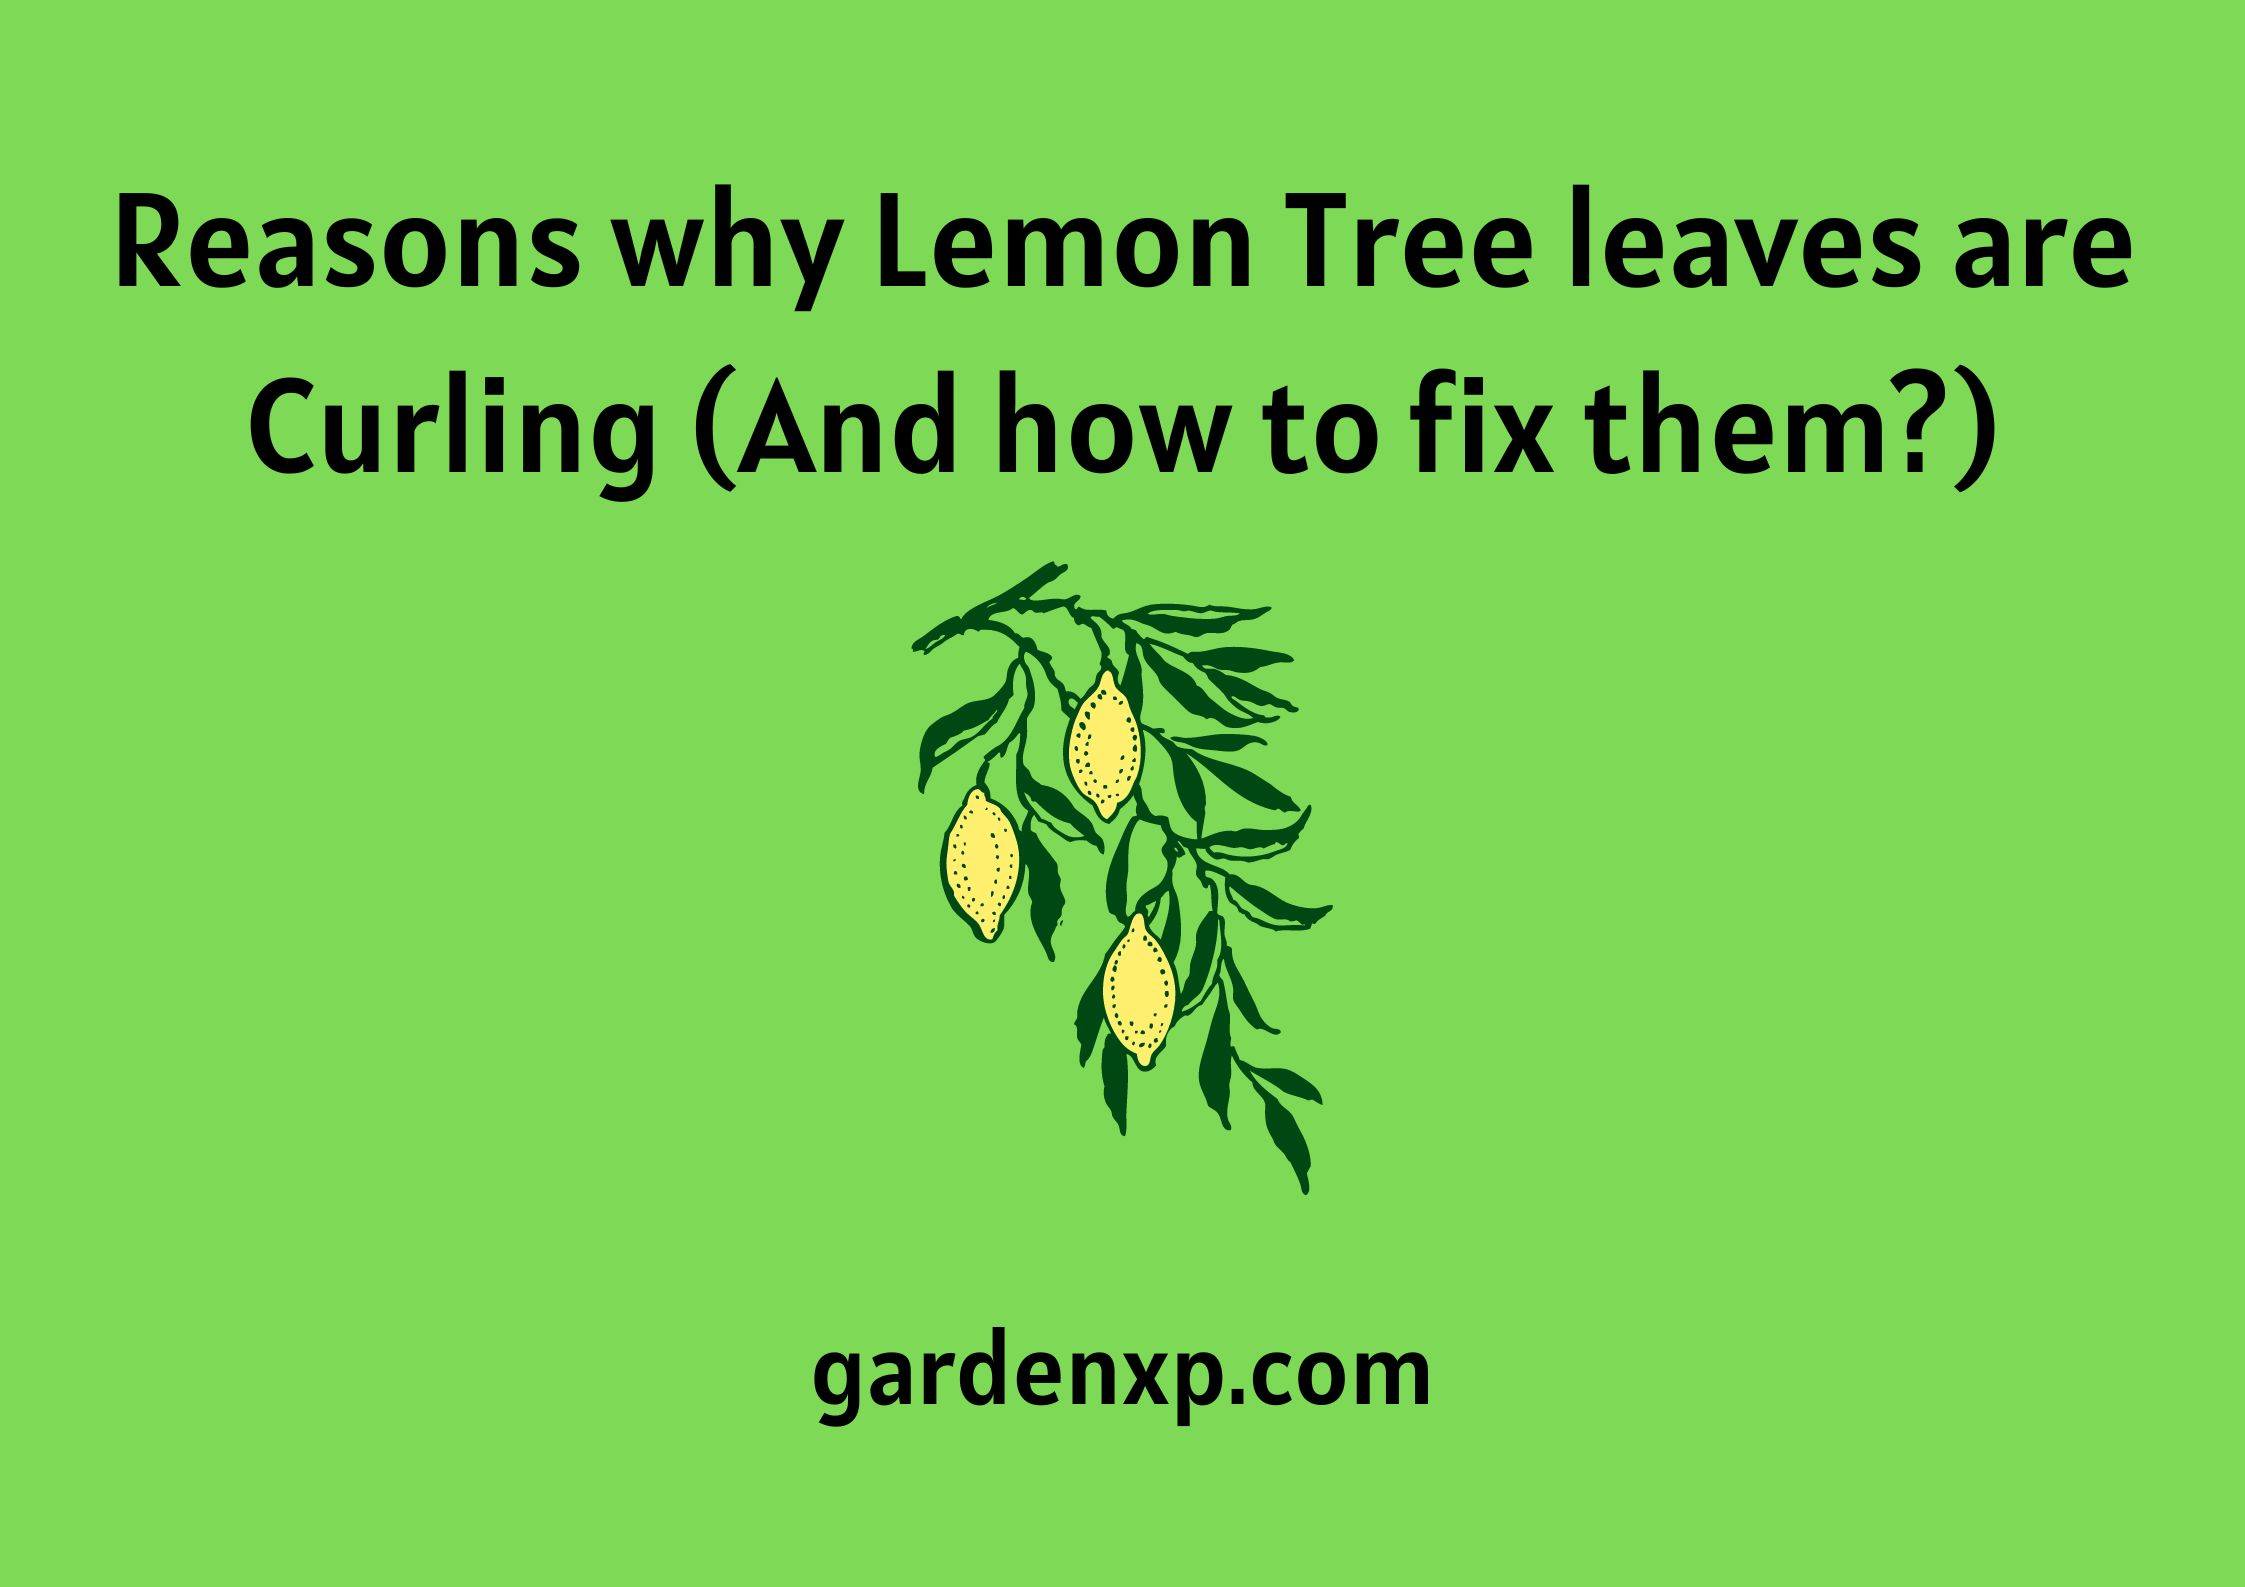 Reasons why Lemon Tree leaves are Curling (And how to fix them?)